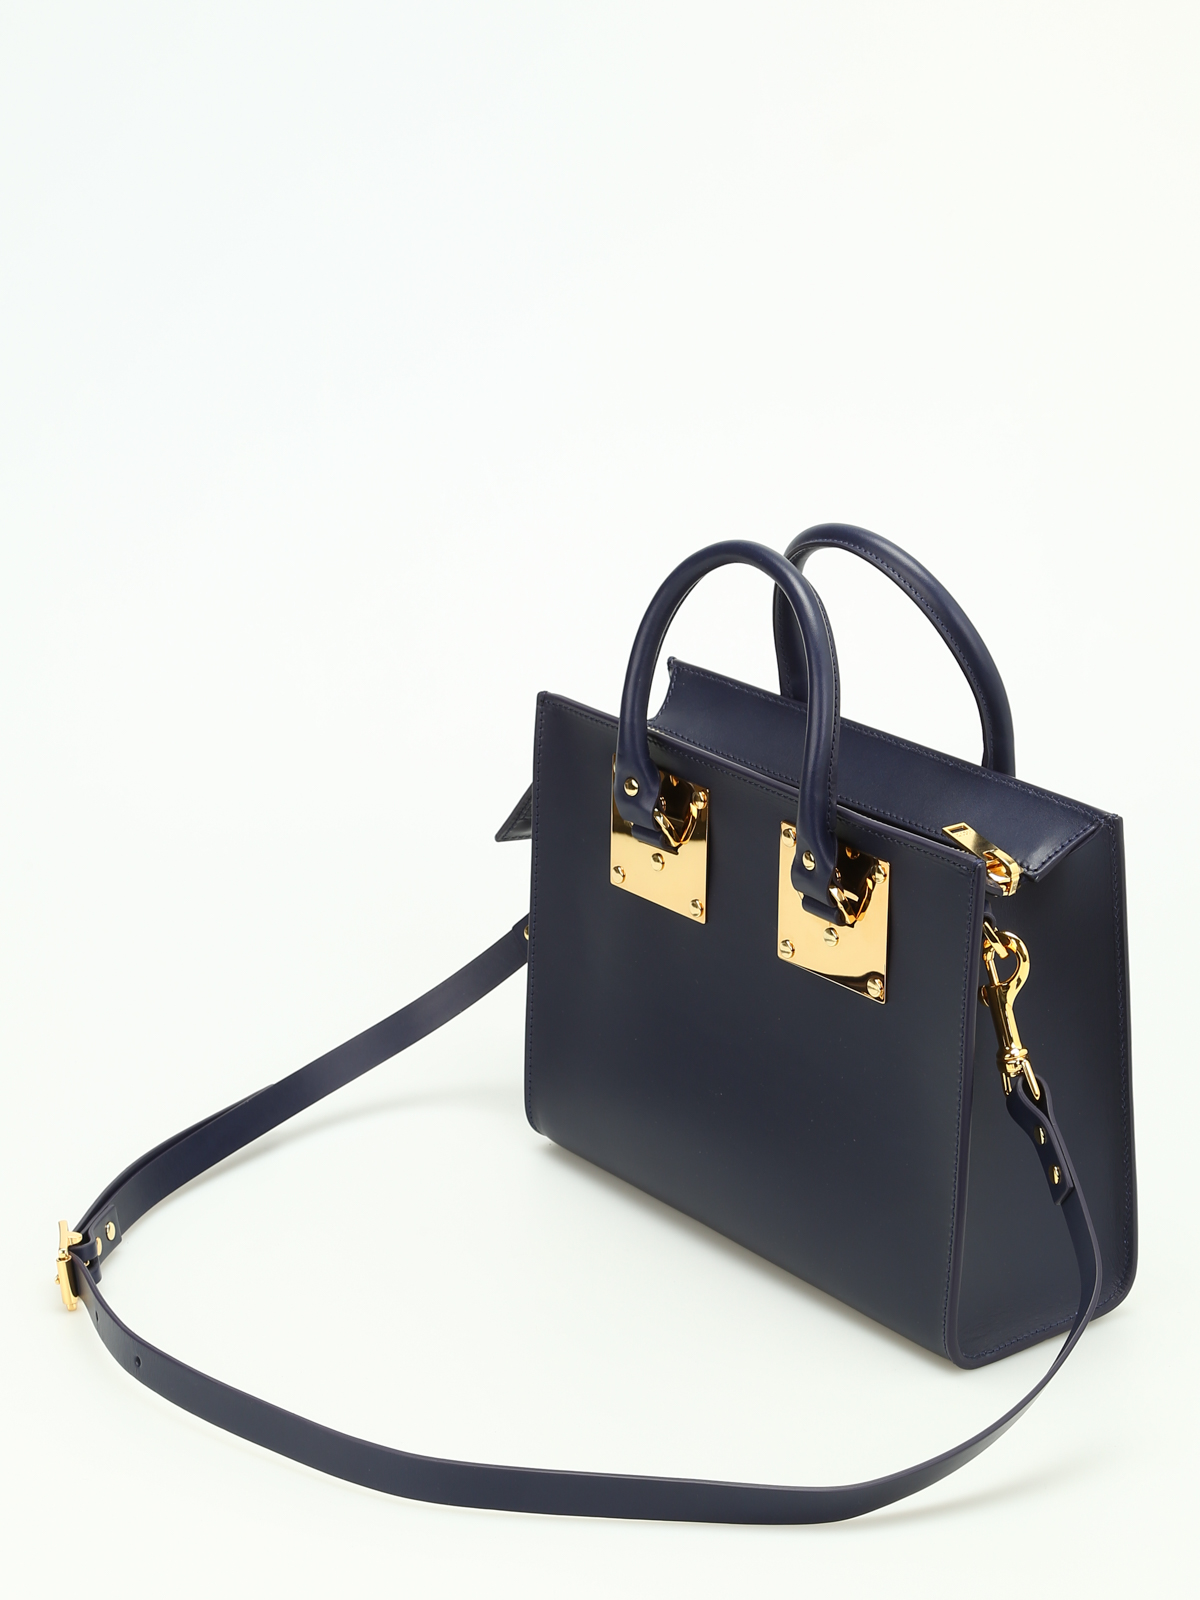 SOPHIE HULME ALBION トートバッグ